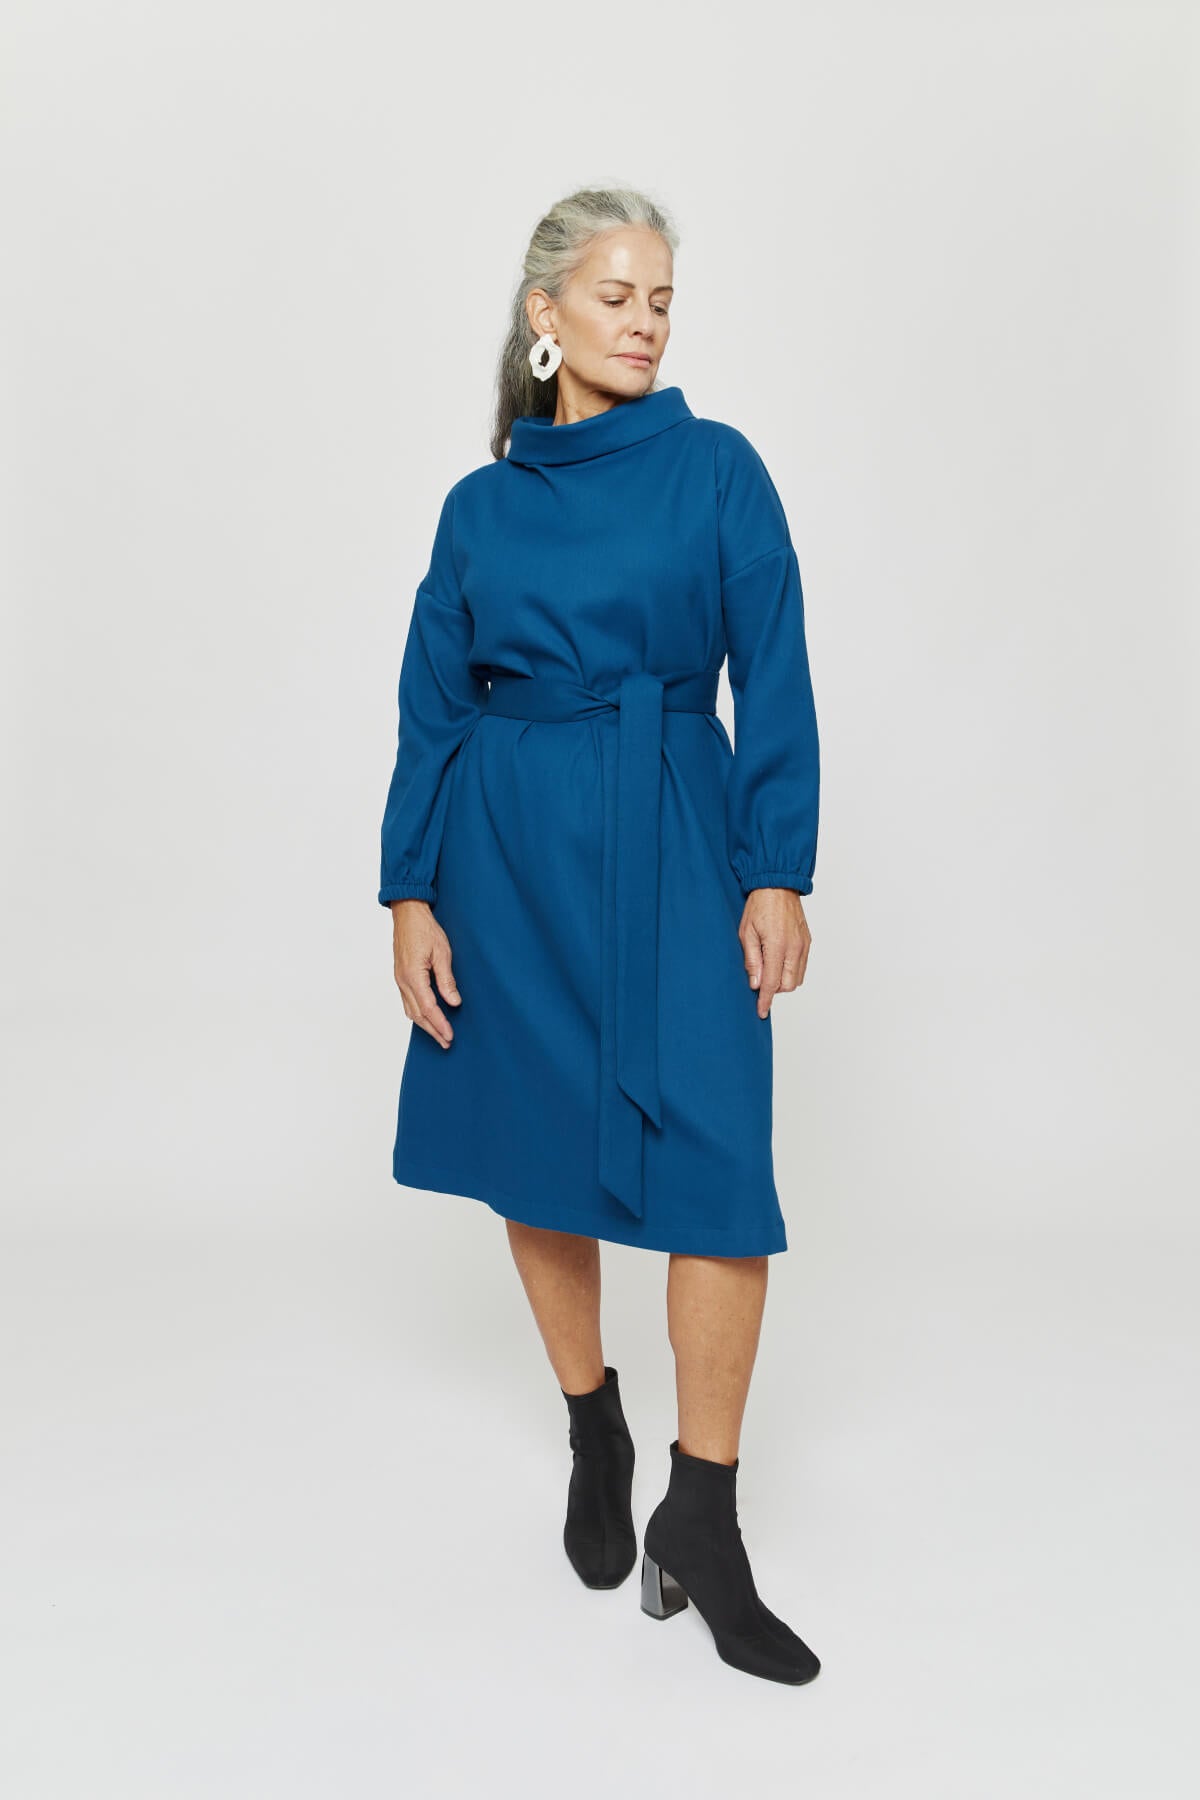 Amalia | Midi Winter Dress with High Rounded Neckline in Petrol-Blue